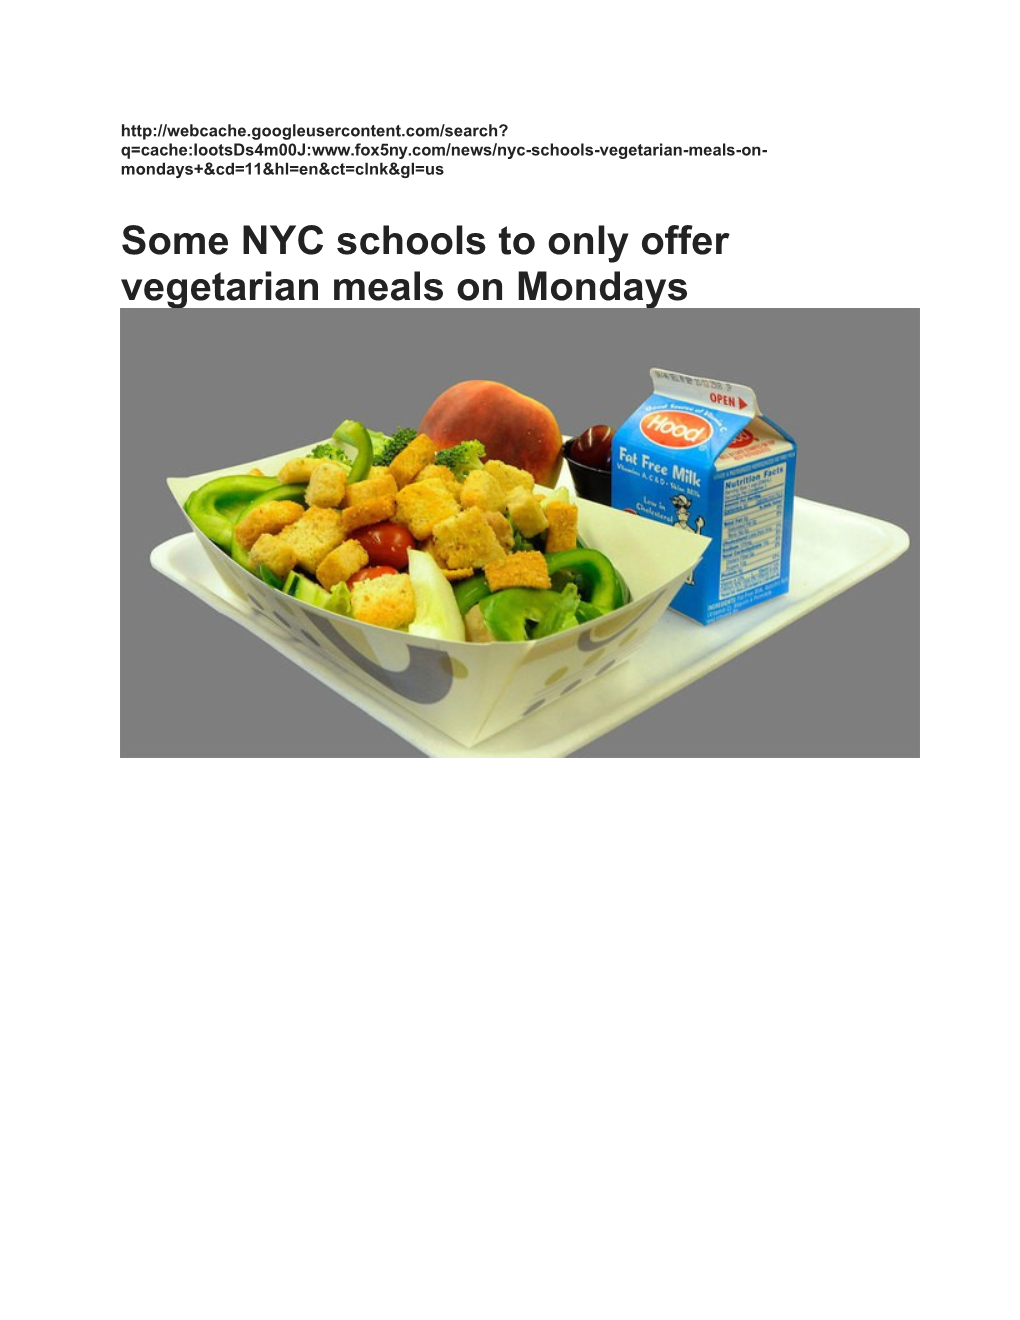 Some NYC Schools to Only Offer Vegetarian Meals on Mondays